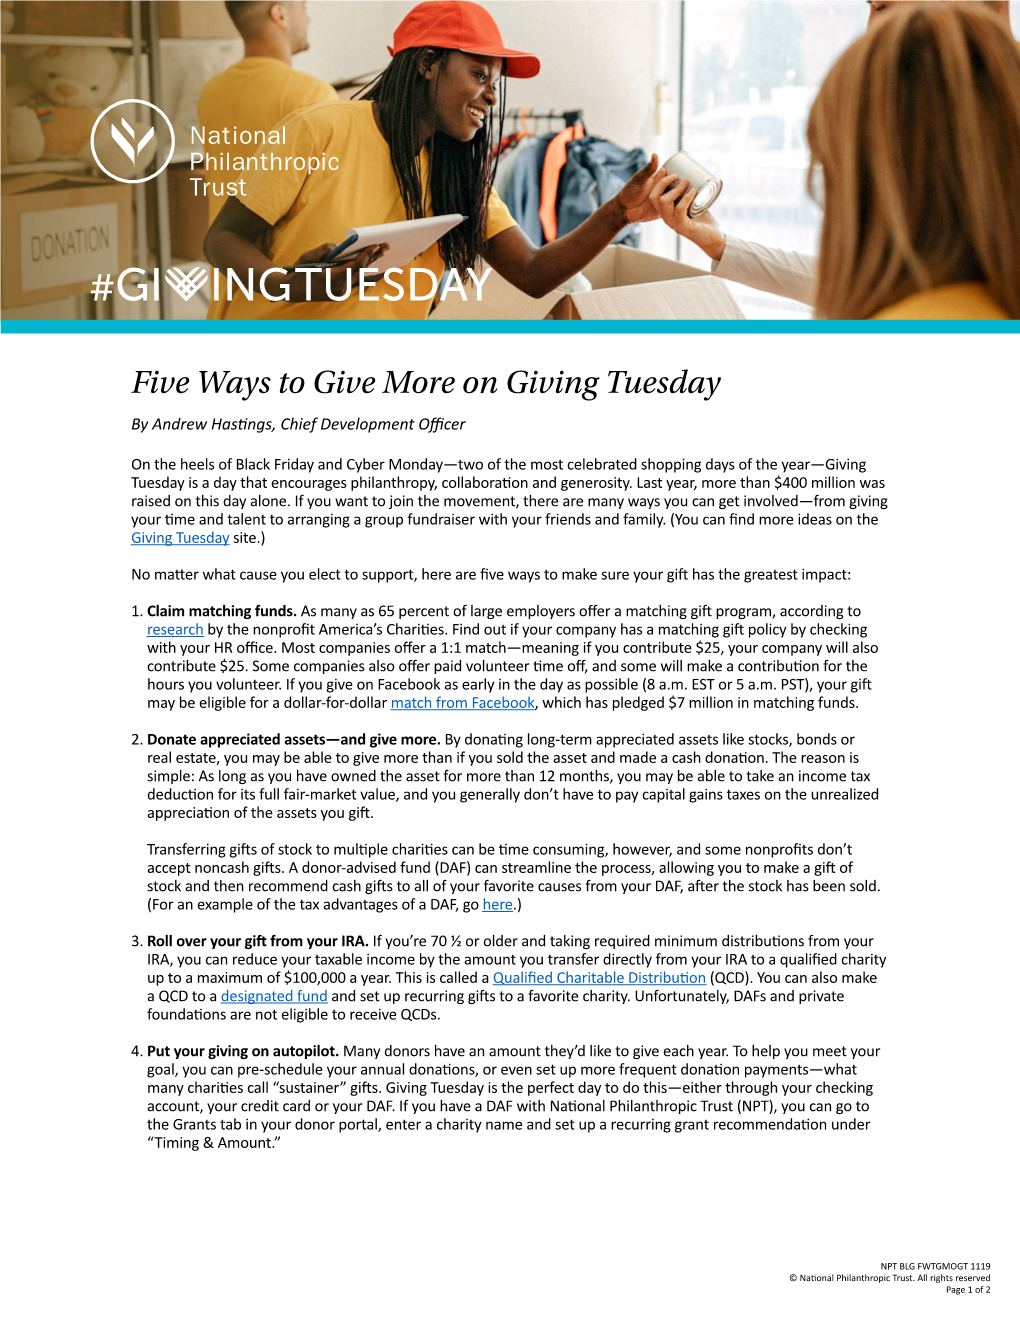 Five Ways to Give More on Giving Tuesday by Andrew Hastings, Chief Development Officer